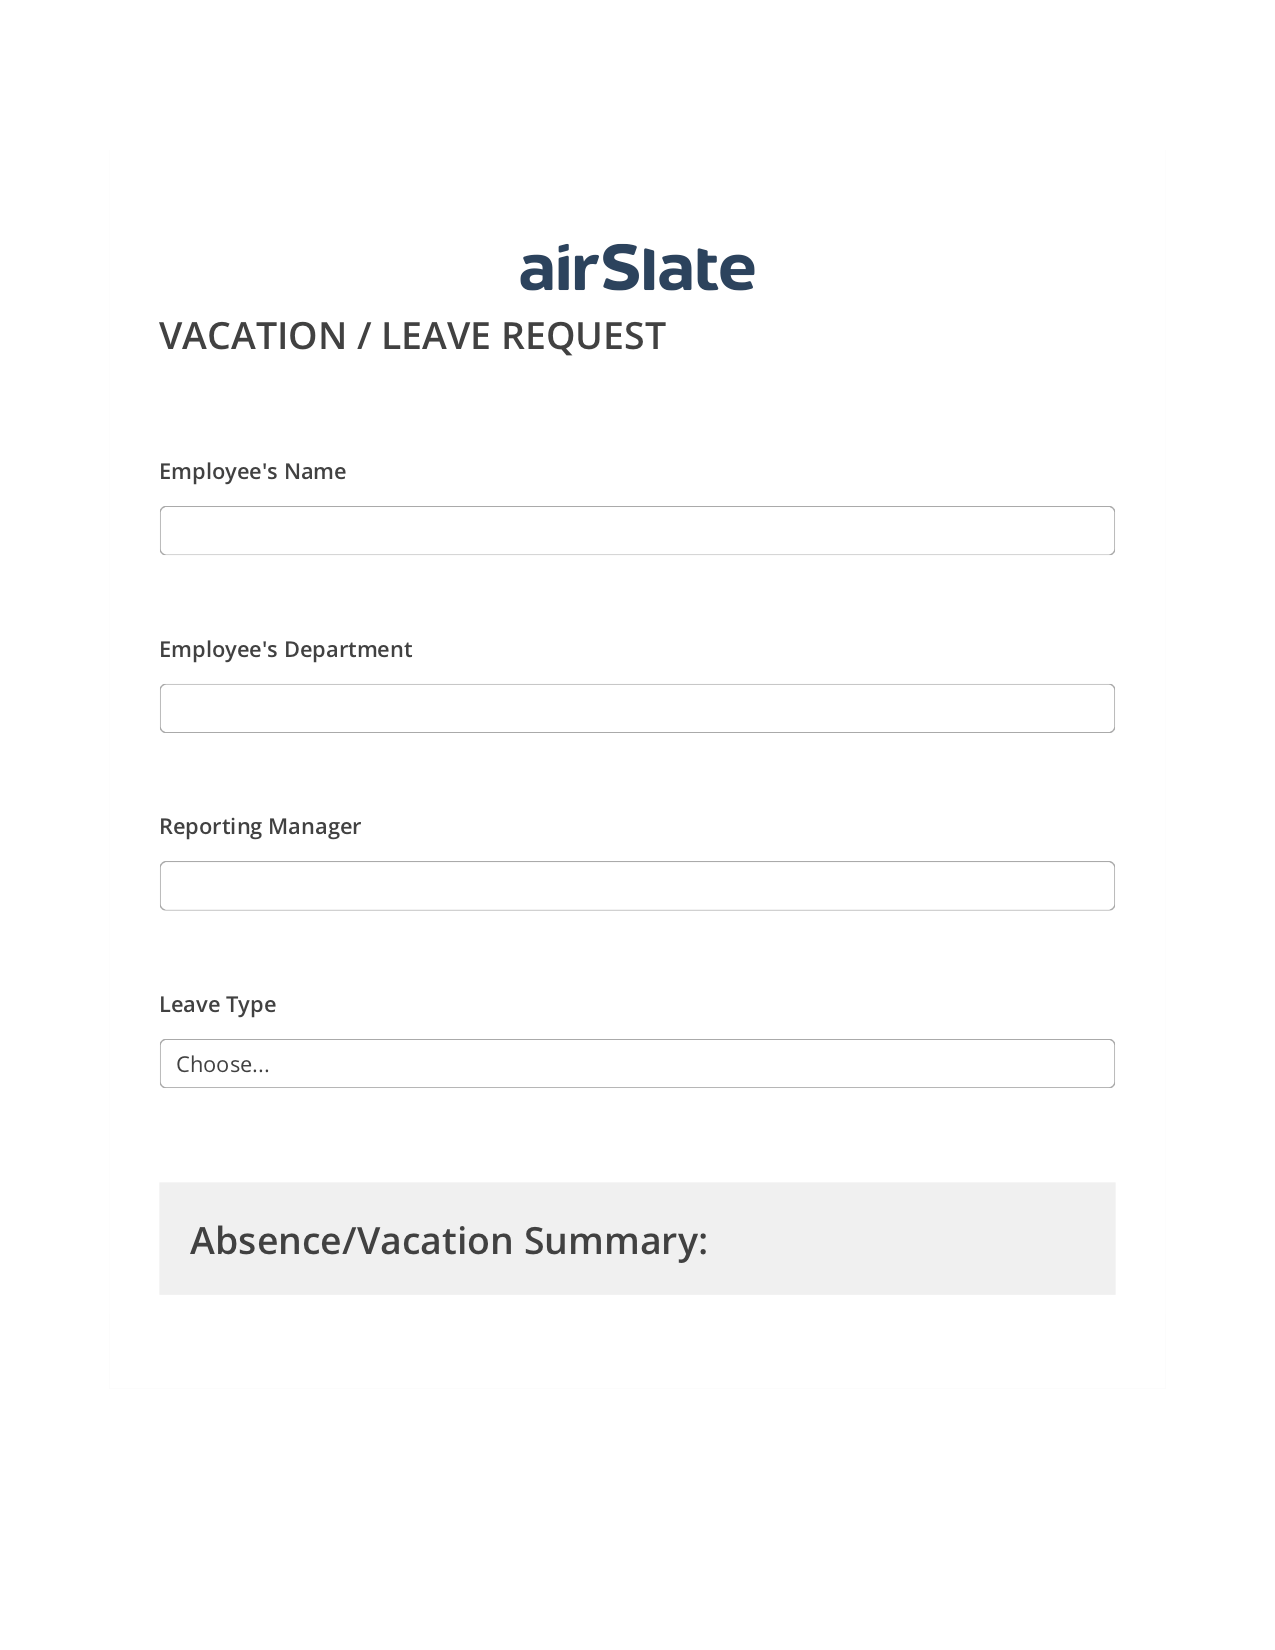 Multirole Vacation/Leave Request Workflow Pre-fill Dropdowns from CSV file Bot, Unassign Role Bot, Archive to OneDrive Bot